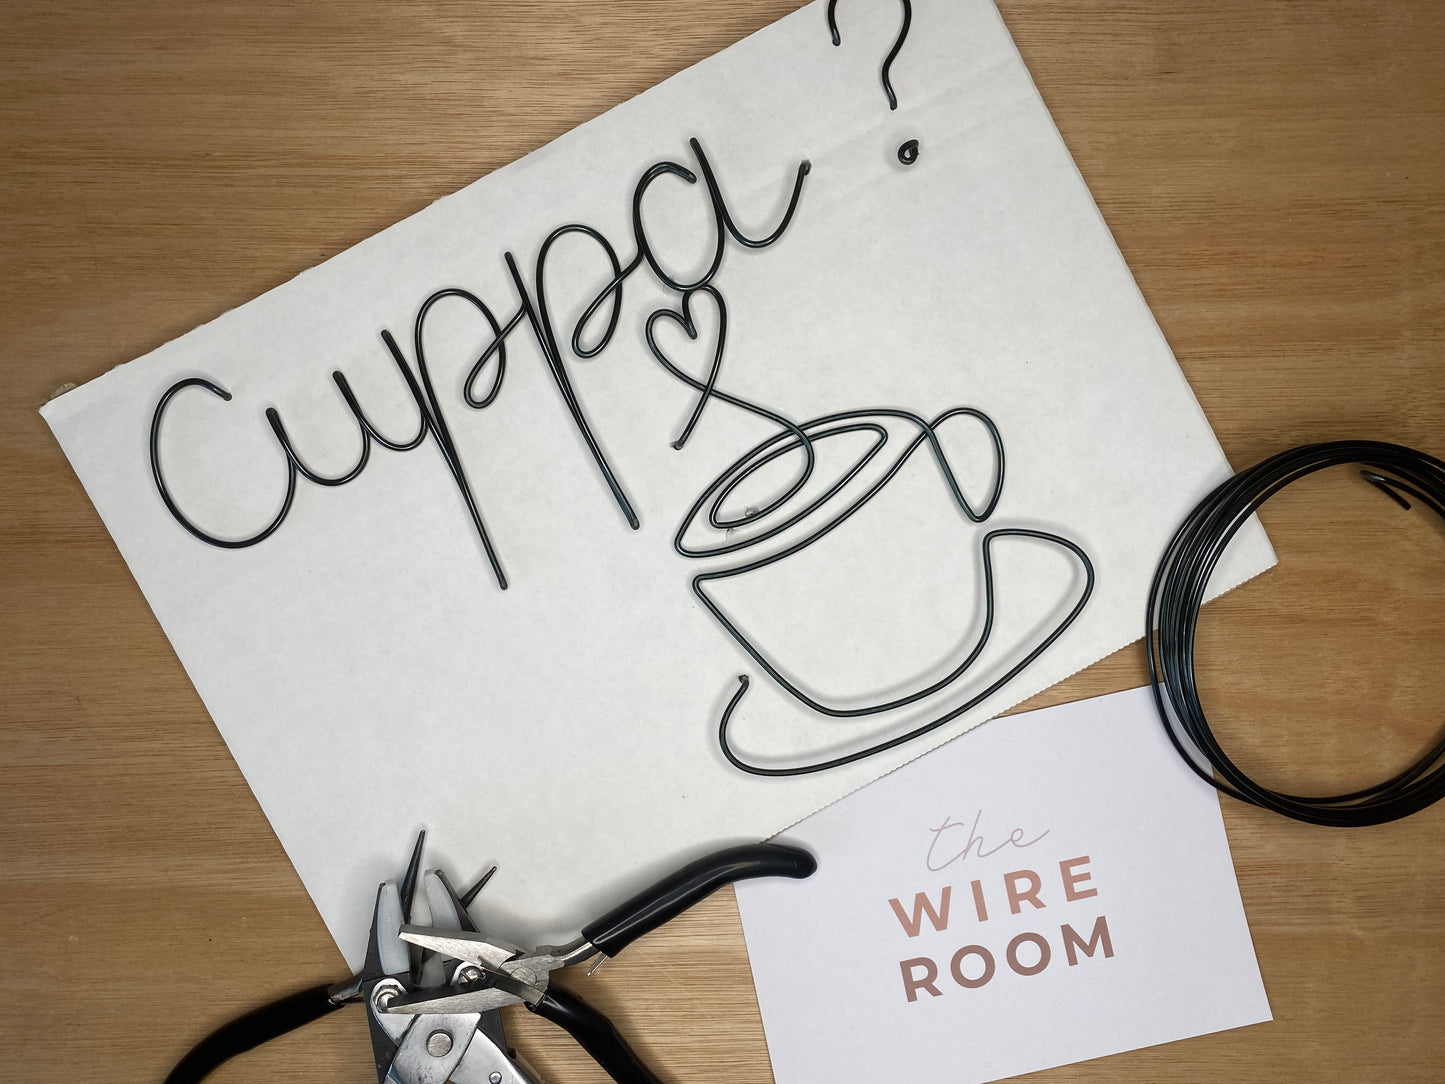 Cuppa? & cup ( 2mm wire )